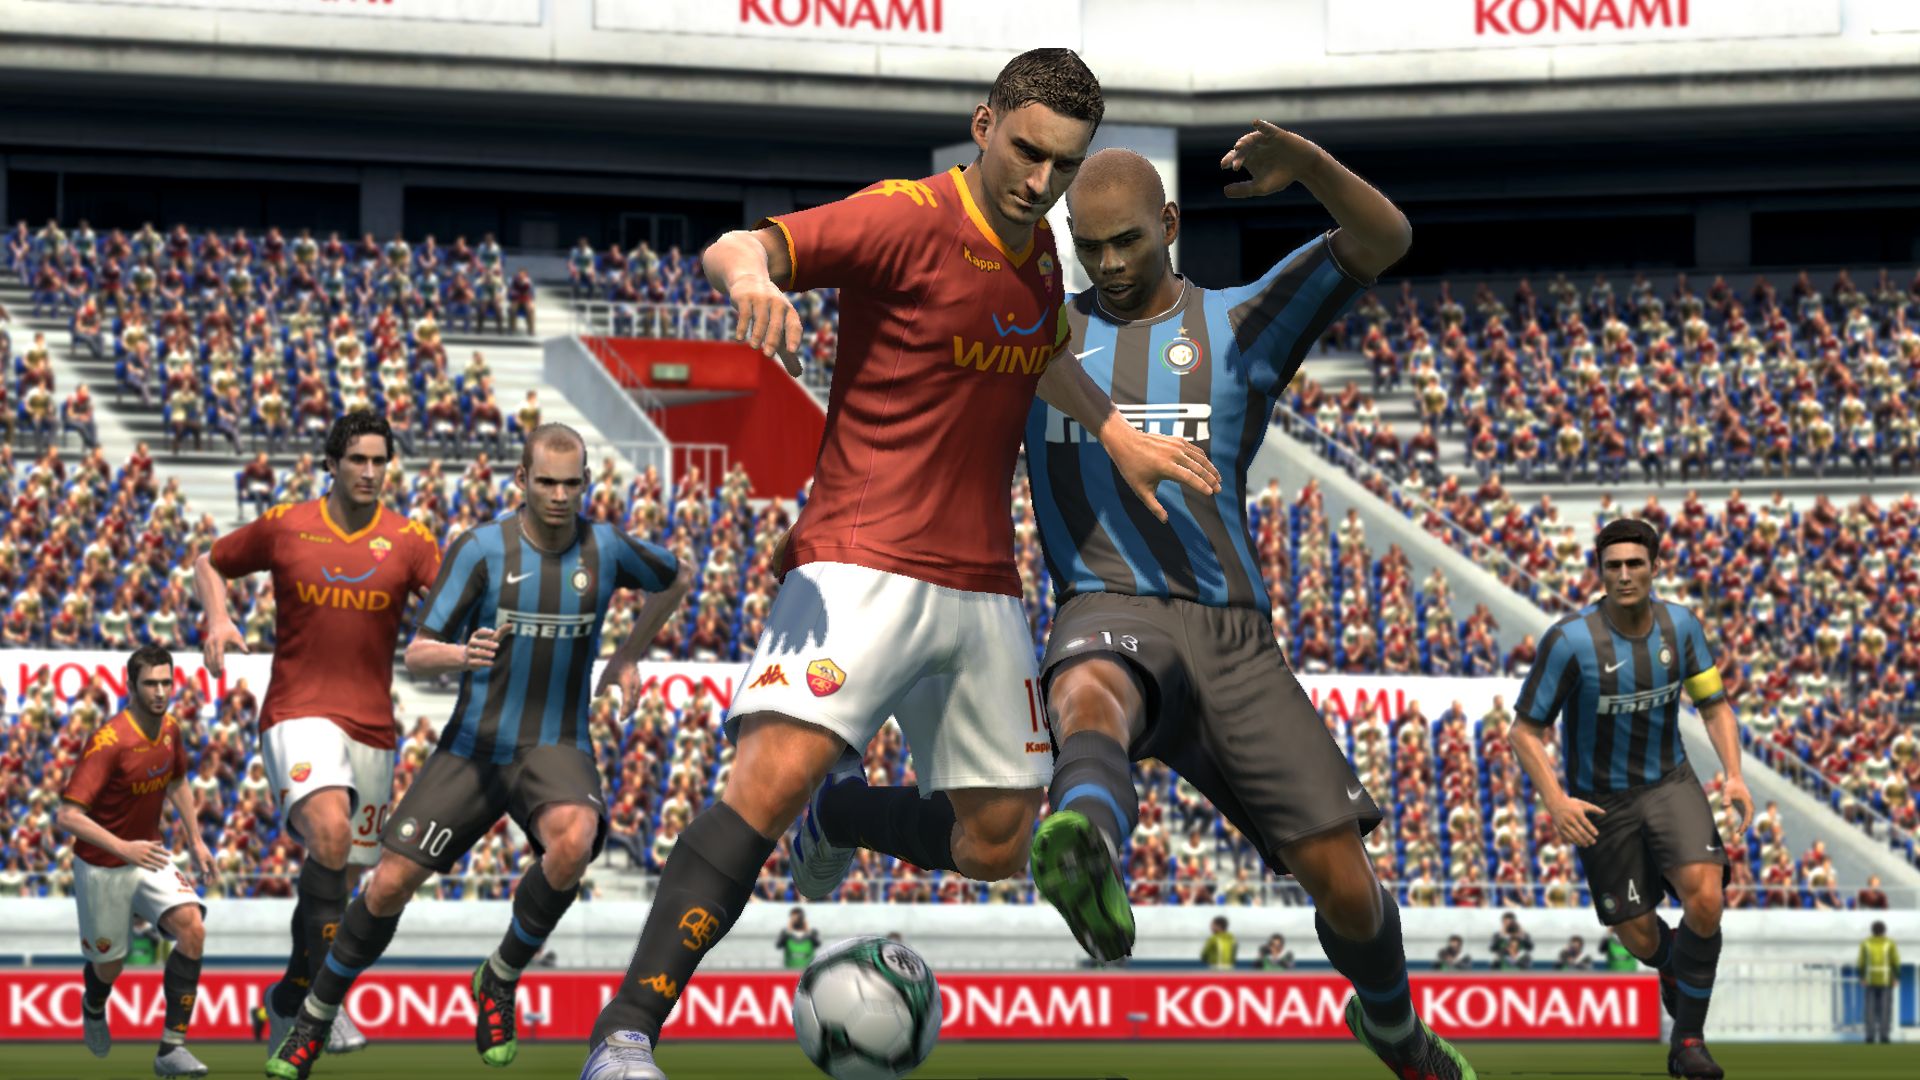 PES 2011 images - Image #2609 | New Game Network